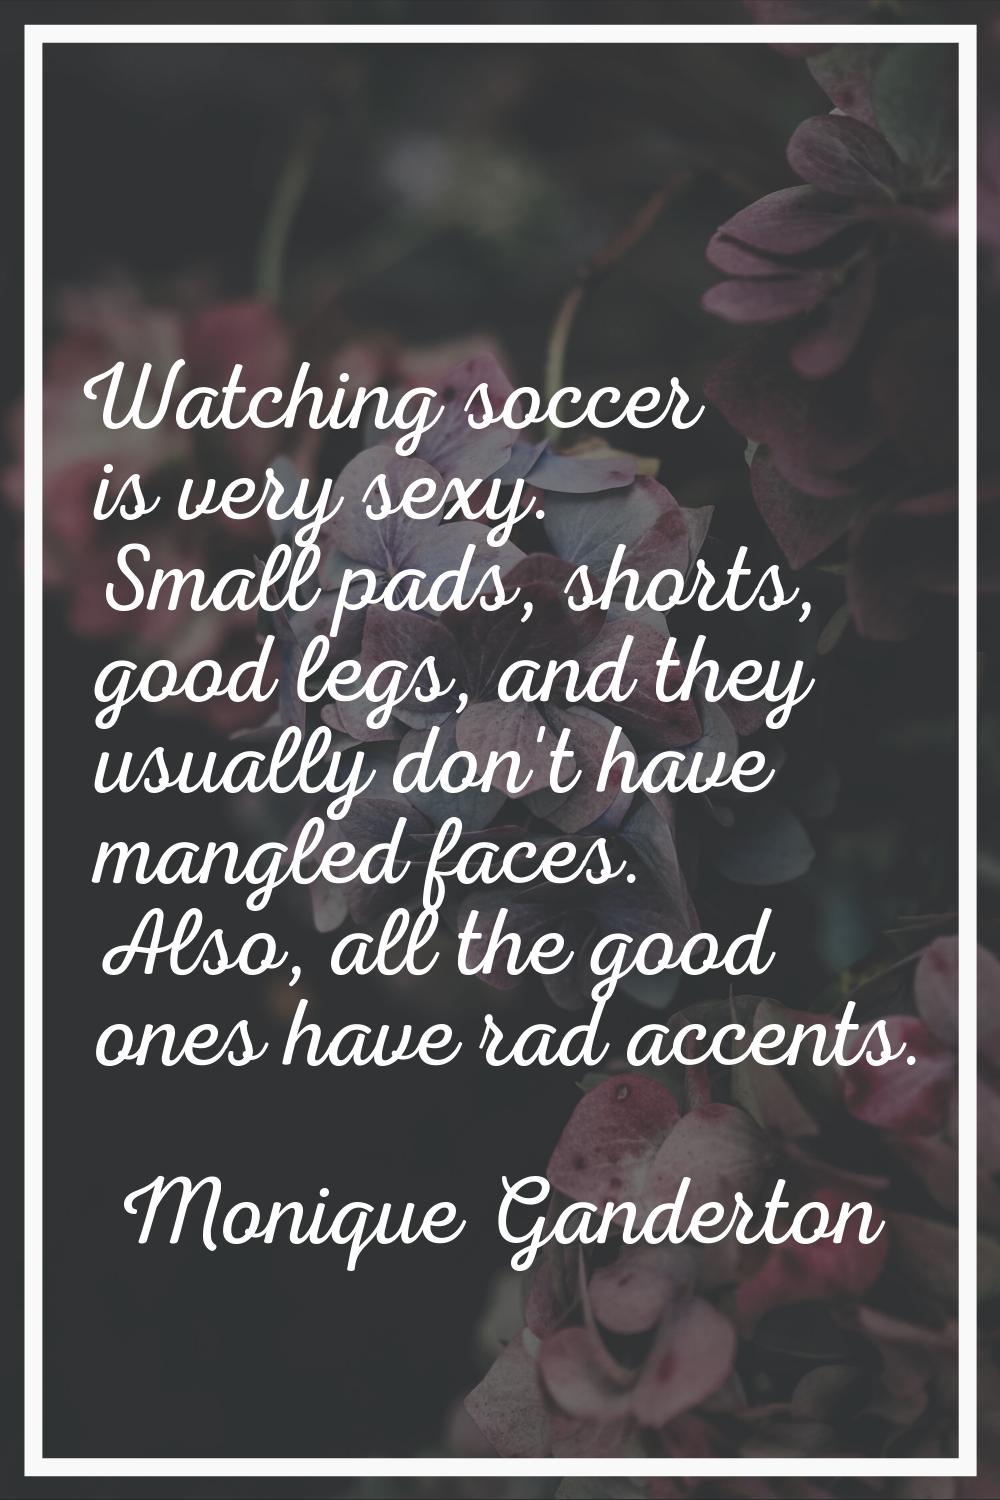 Watching soccer is very sexy. Small pads, shorts, good legs, and they usually don't have mangled fa